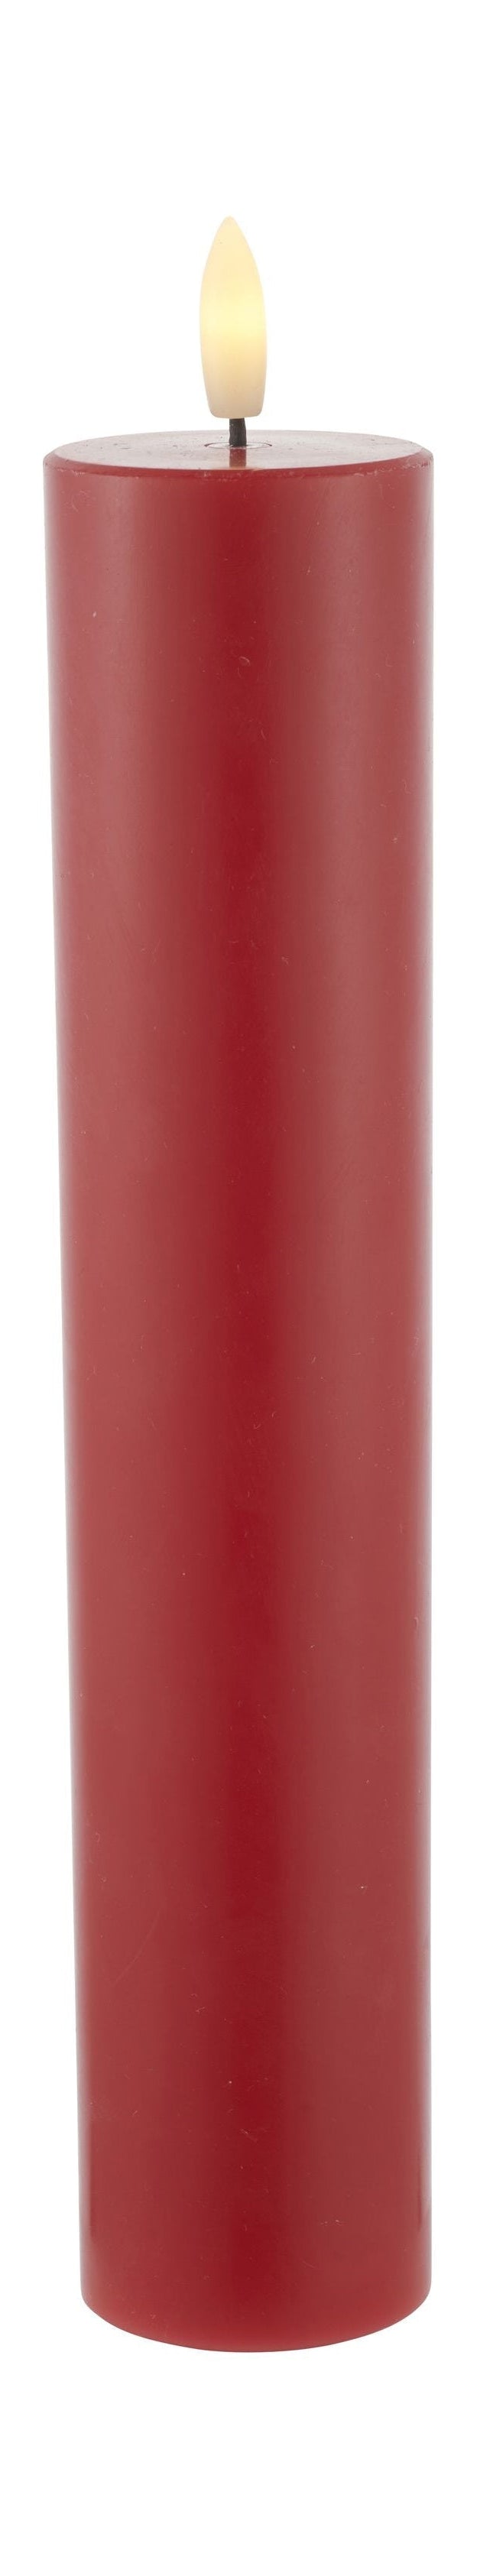 Sirius Sille LED CANDLE Ø5X H25CM, rosso